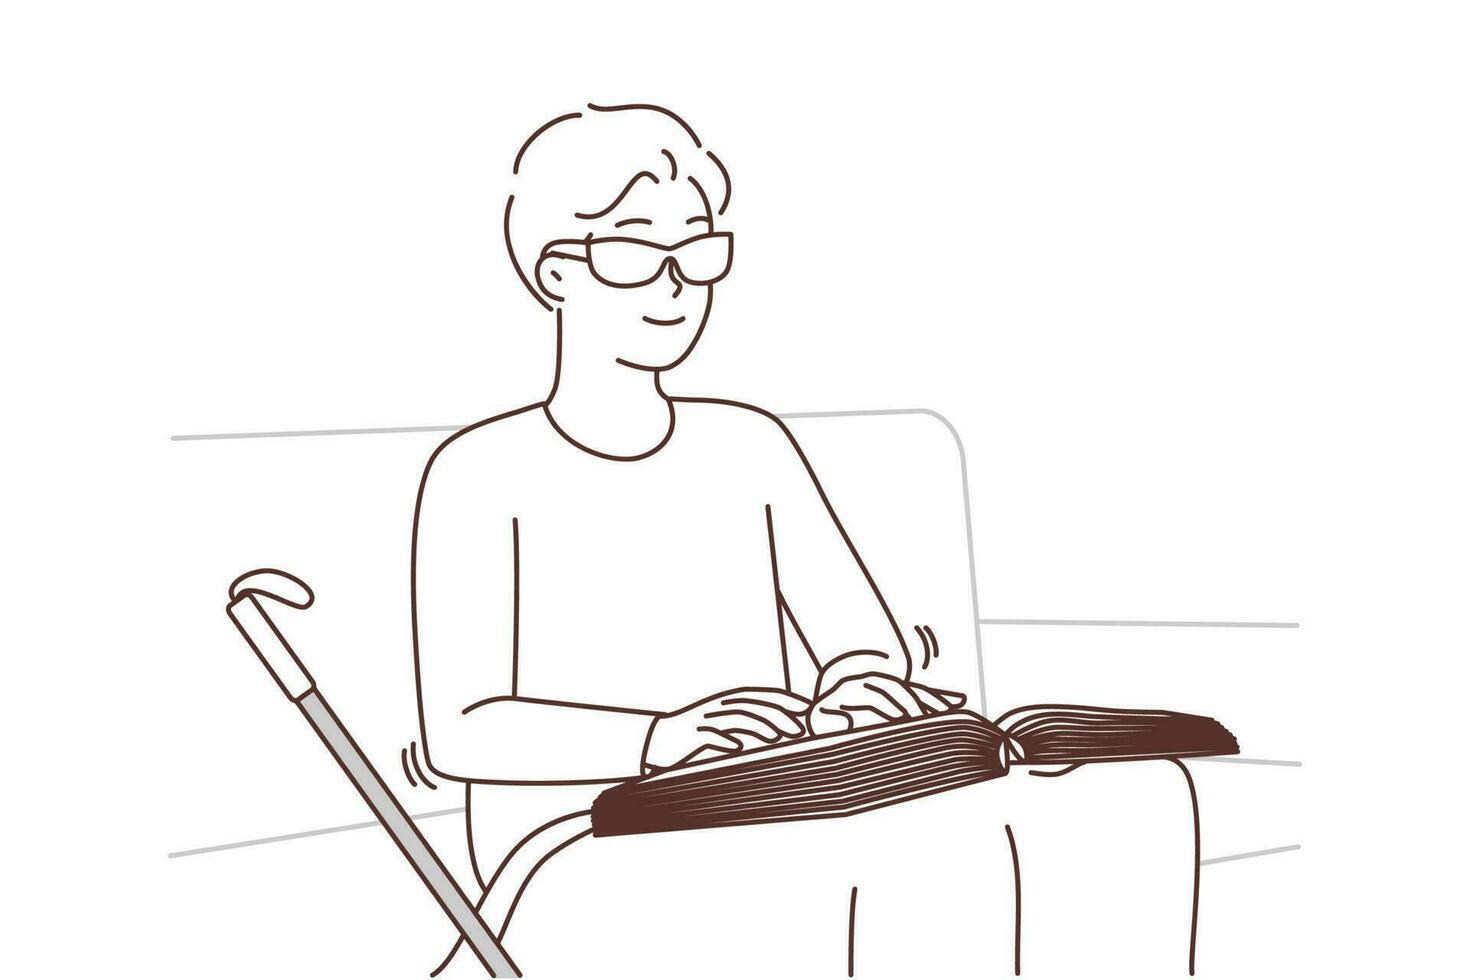 Blind man reading braille book at home. Smiling positive guy in glasses read textbook by touch. Blindness and disability. Vector illustration.